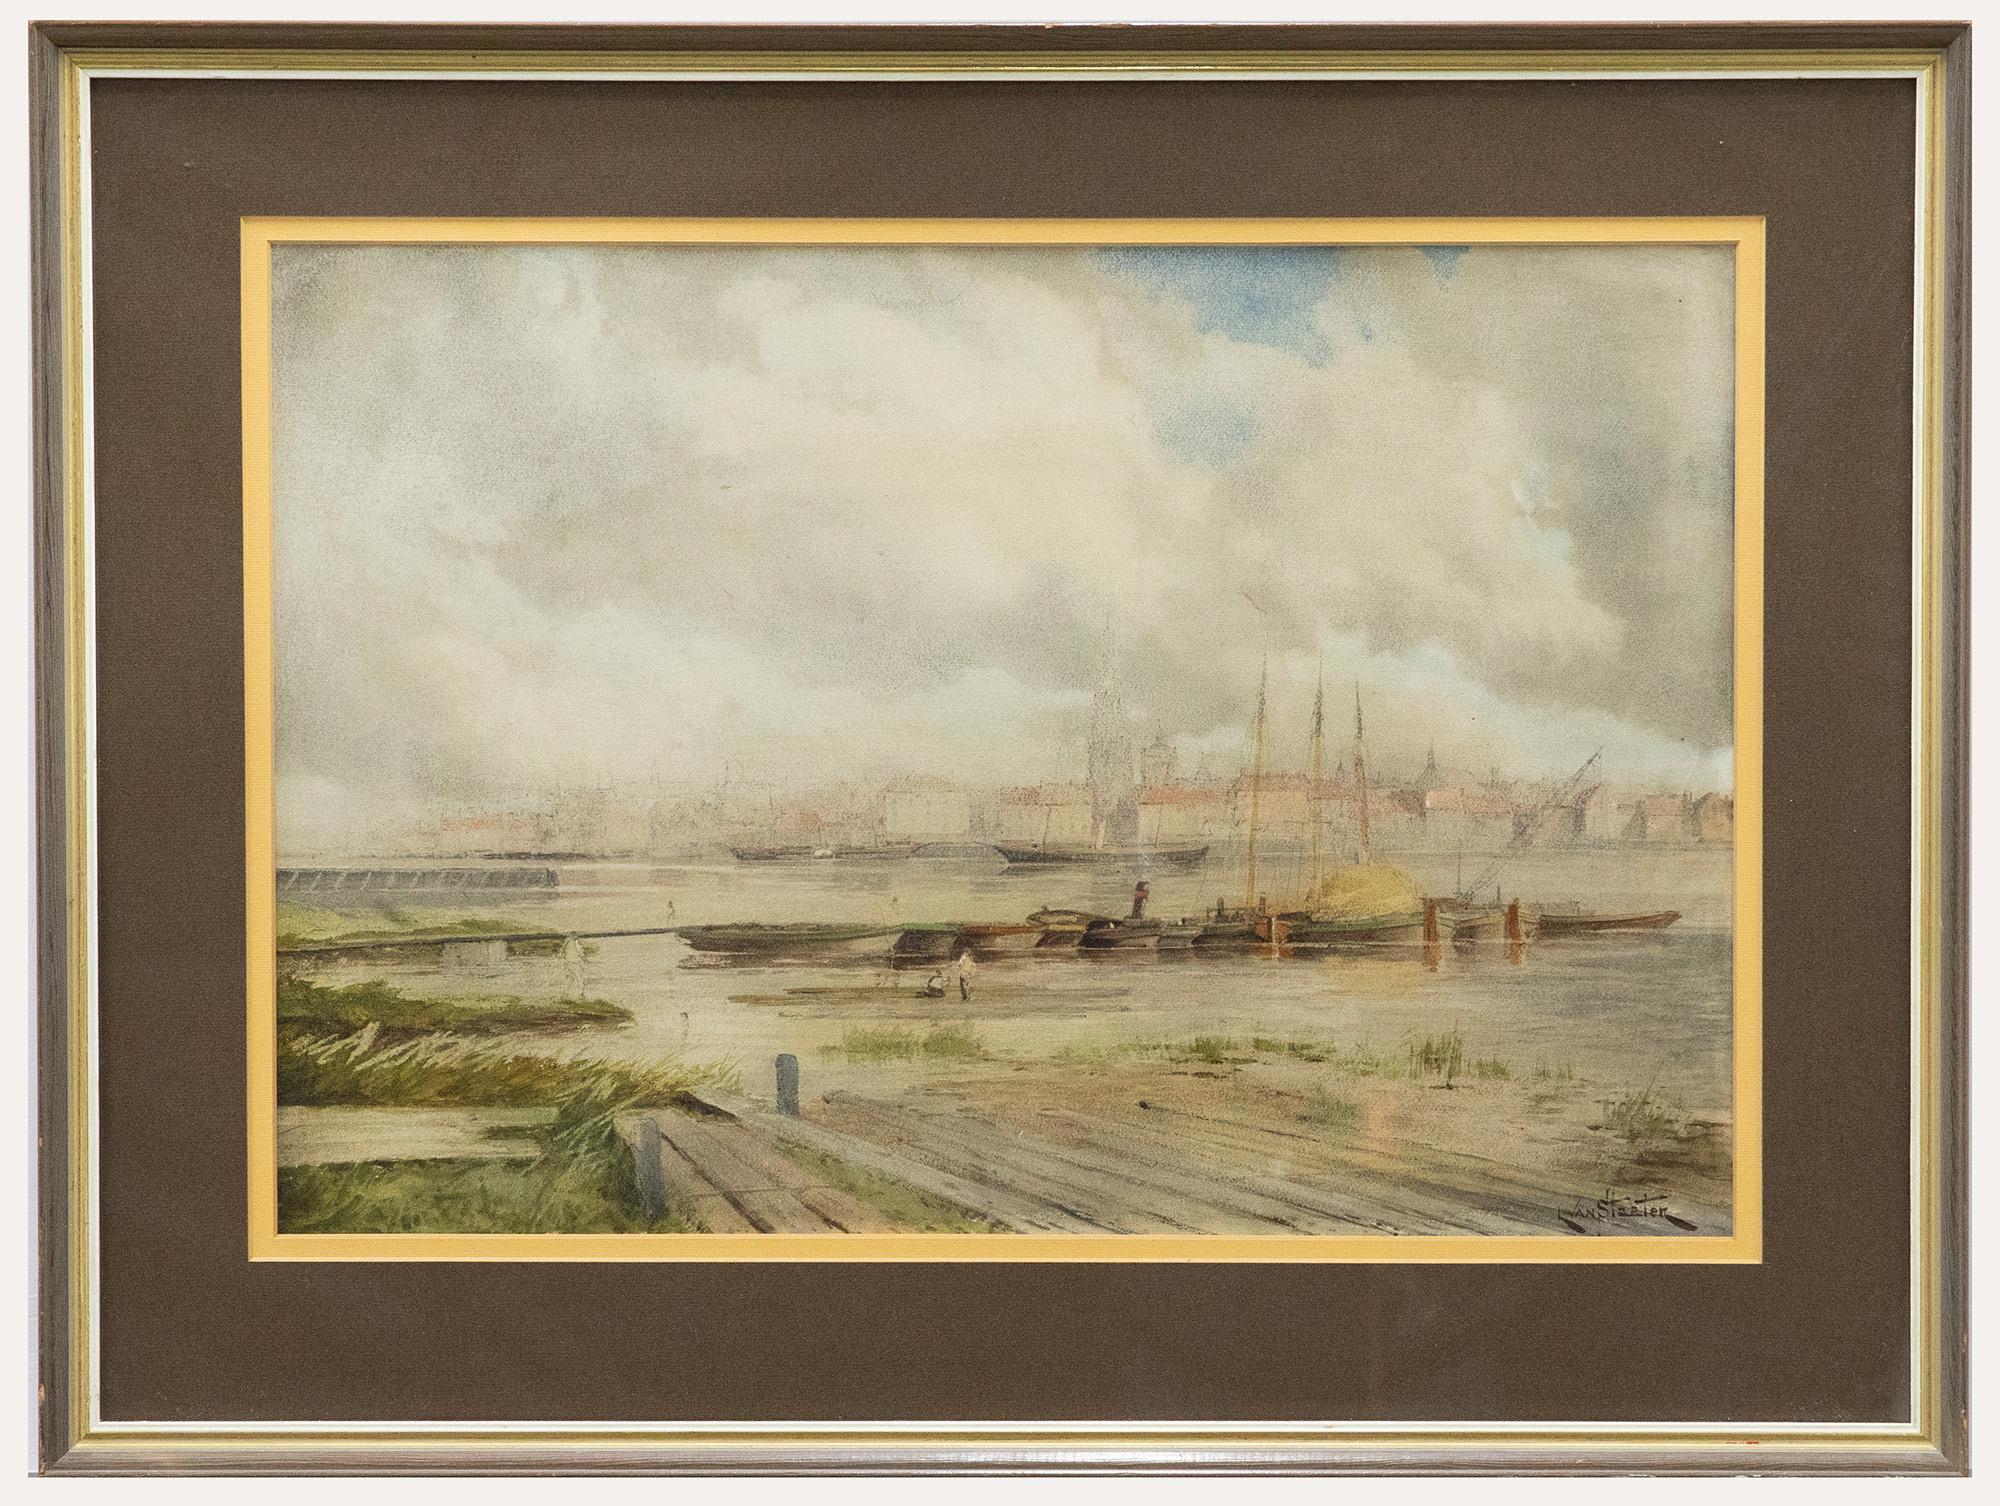 A delightful watercolour scene depicting a town harbour early in the morning with figures walking out to the boats. In the distance the town's skyline can be see through the morning mist. Signed to the lower right. Presented in a wooden frame with a